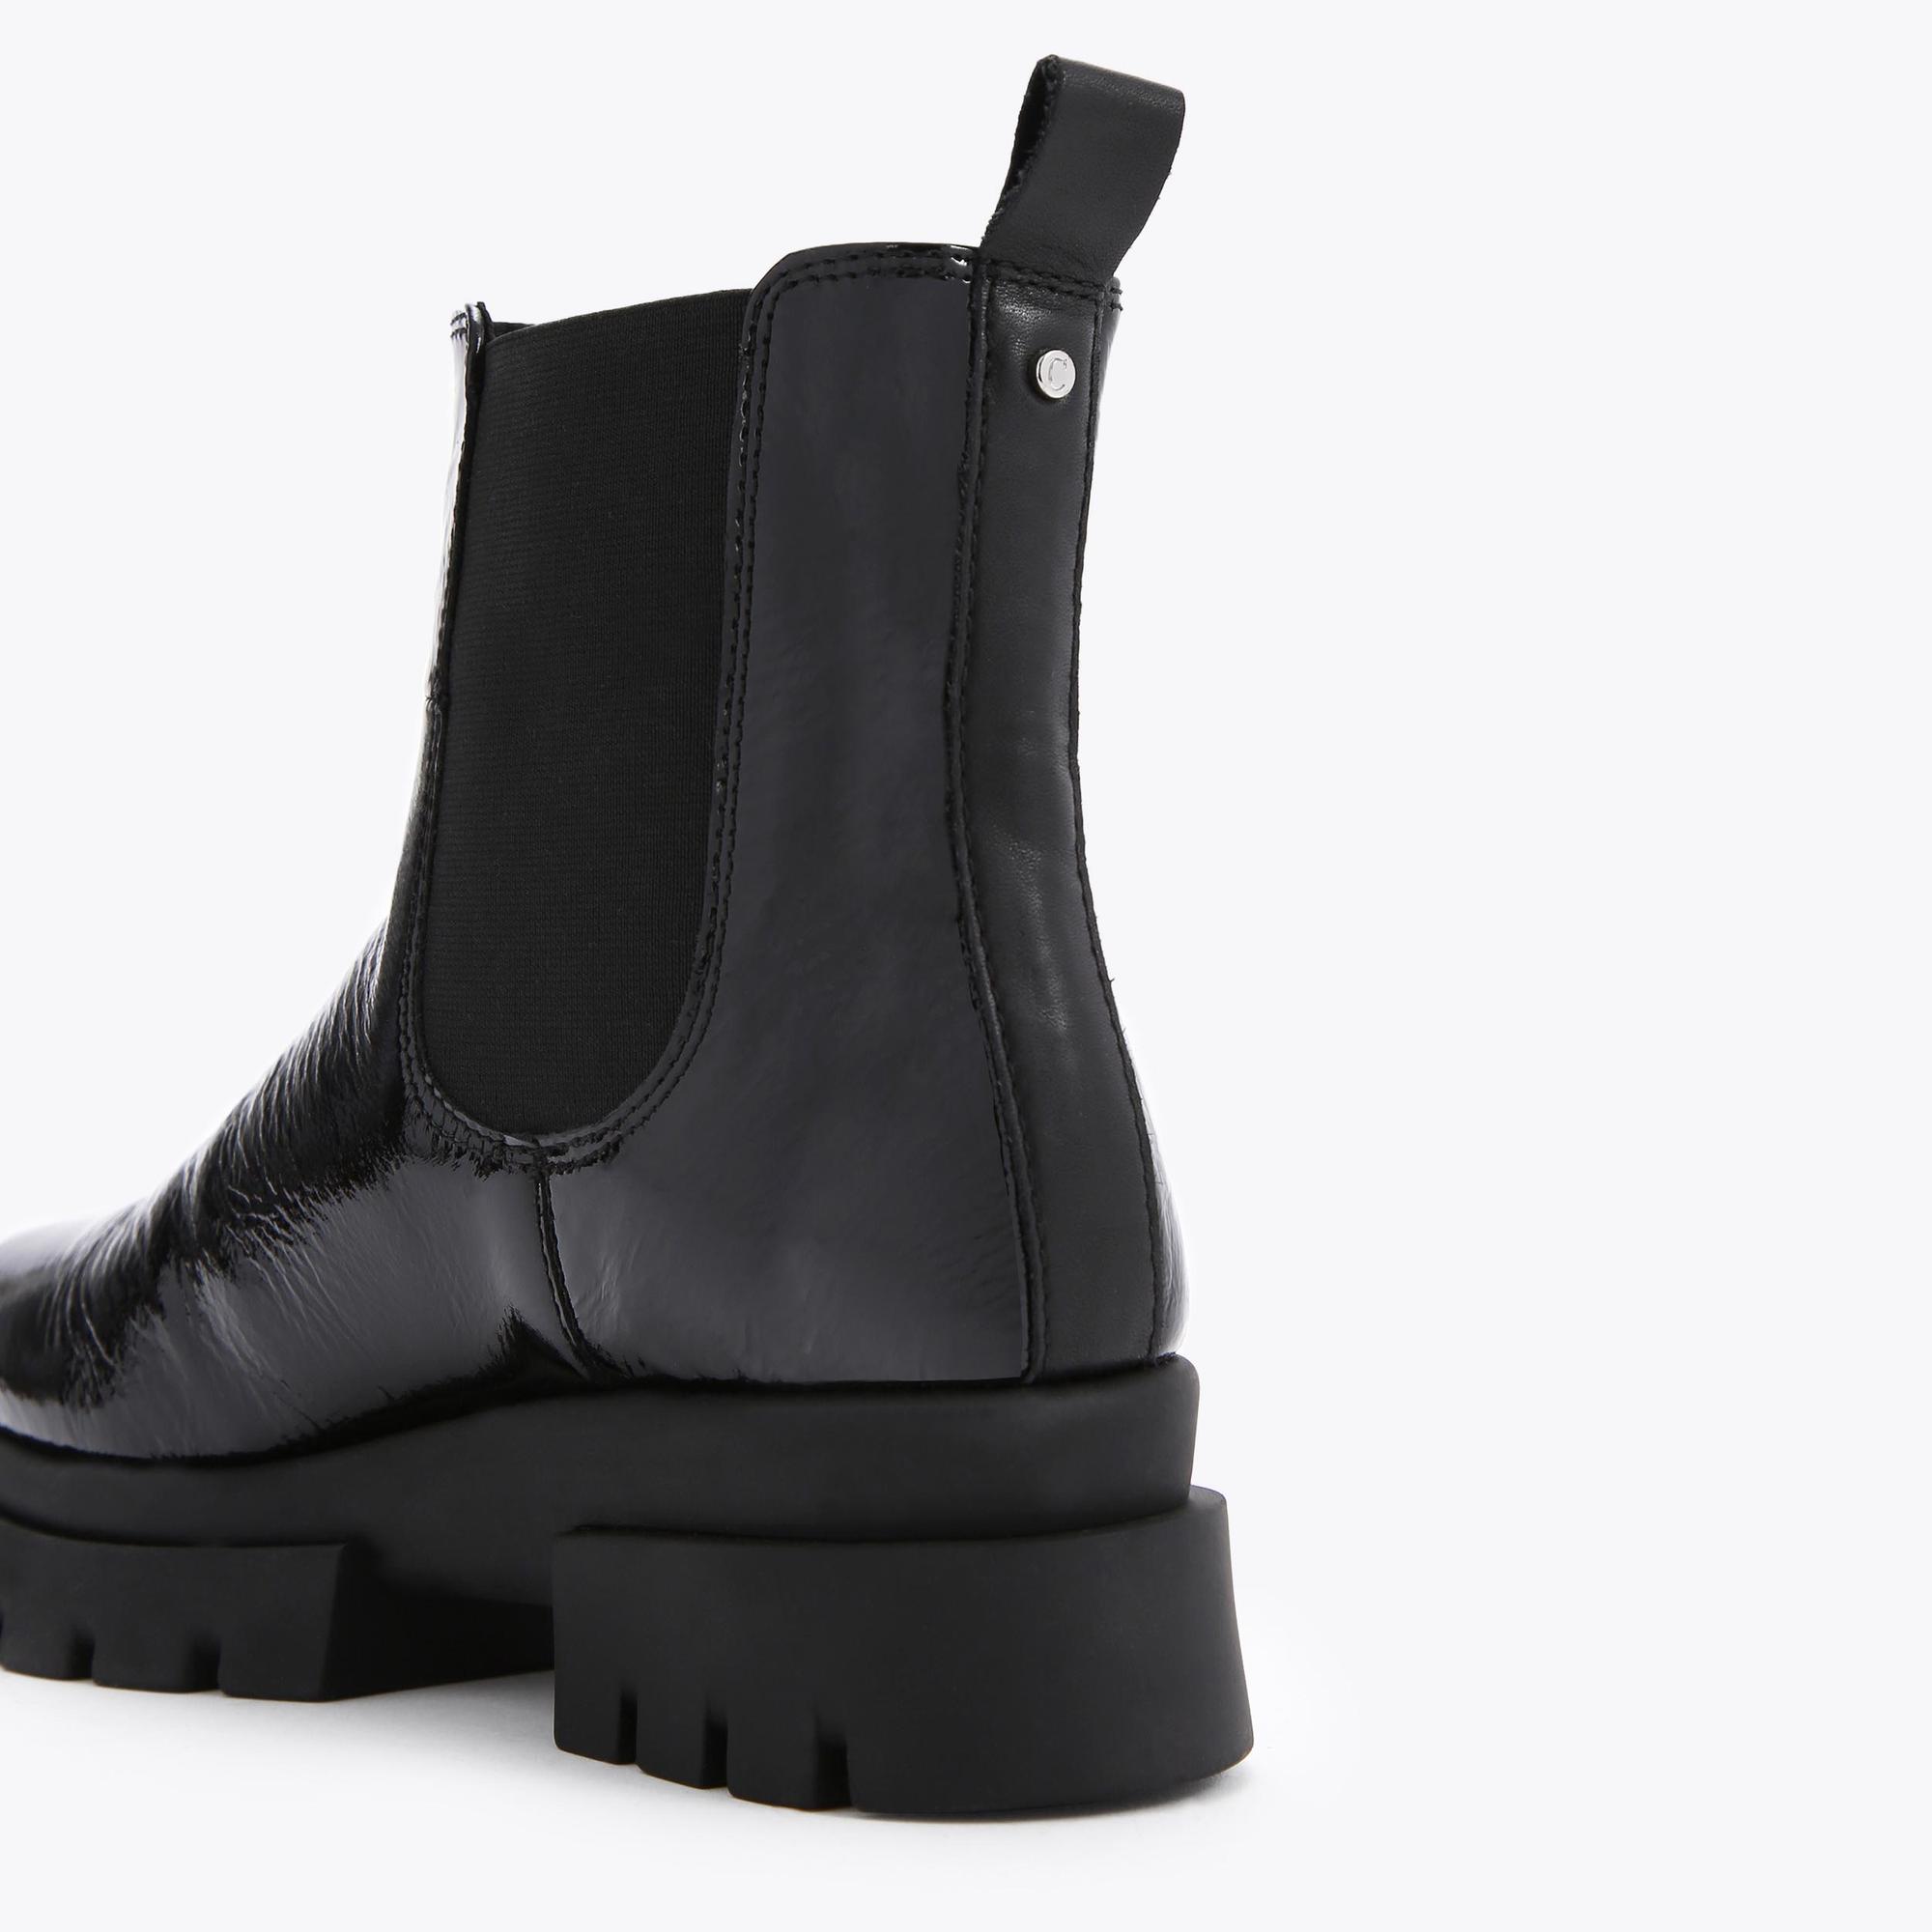 RUN CHELSEA Black Patent Chunky Boots by CARVELA COMFORT